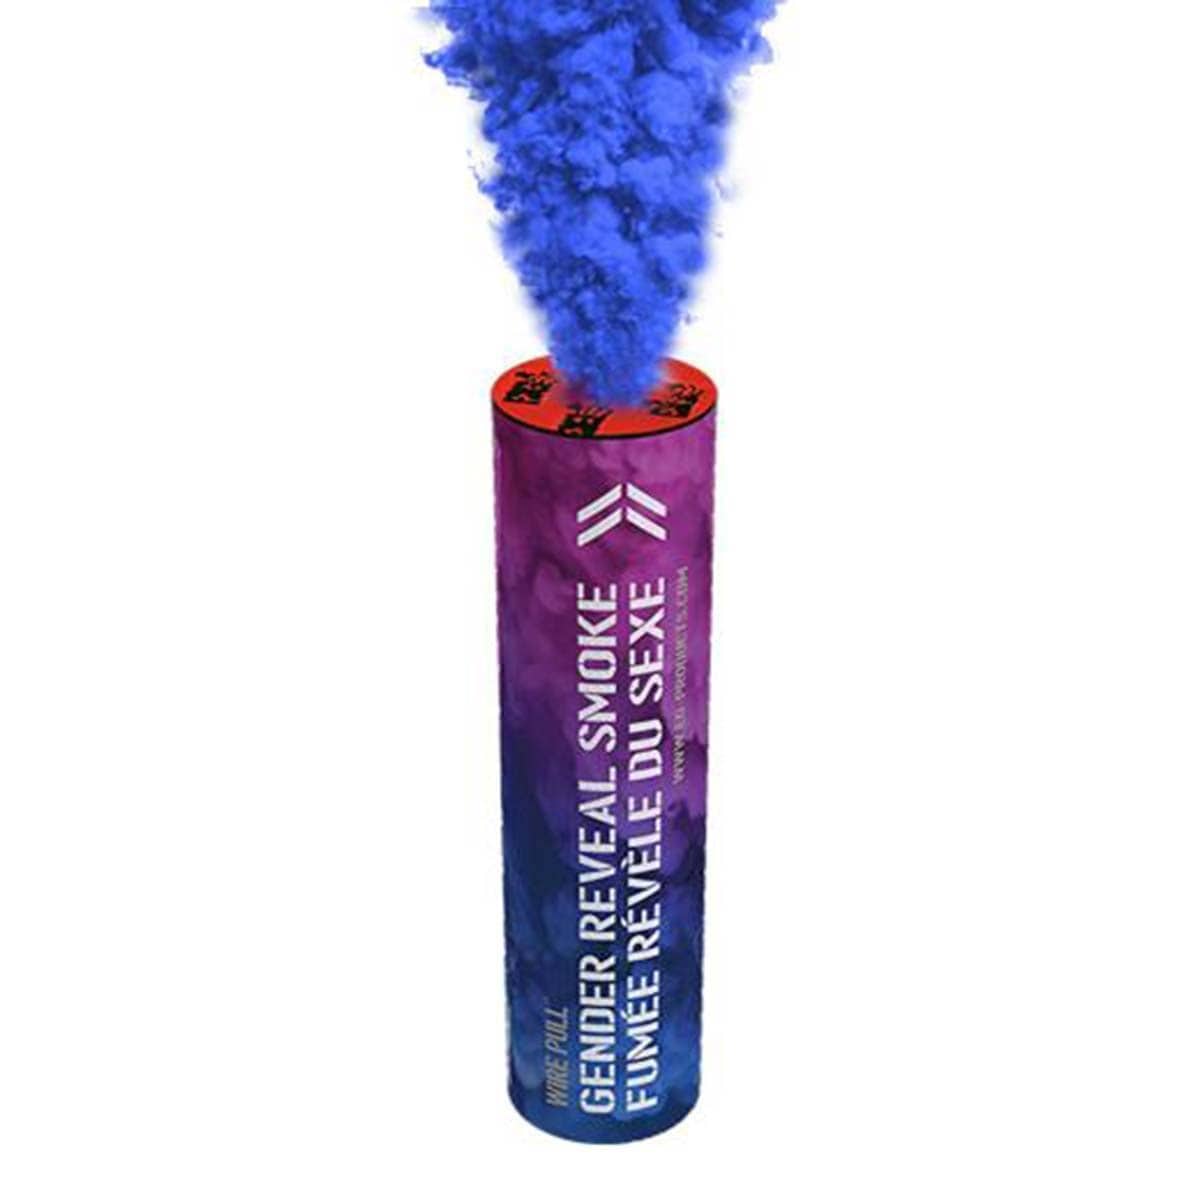 Buy Fireworks Gender Reveal Smoke Bomb - Blue sold at Party Expert